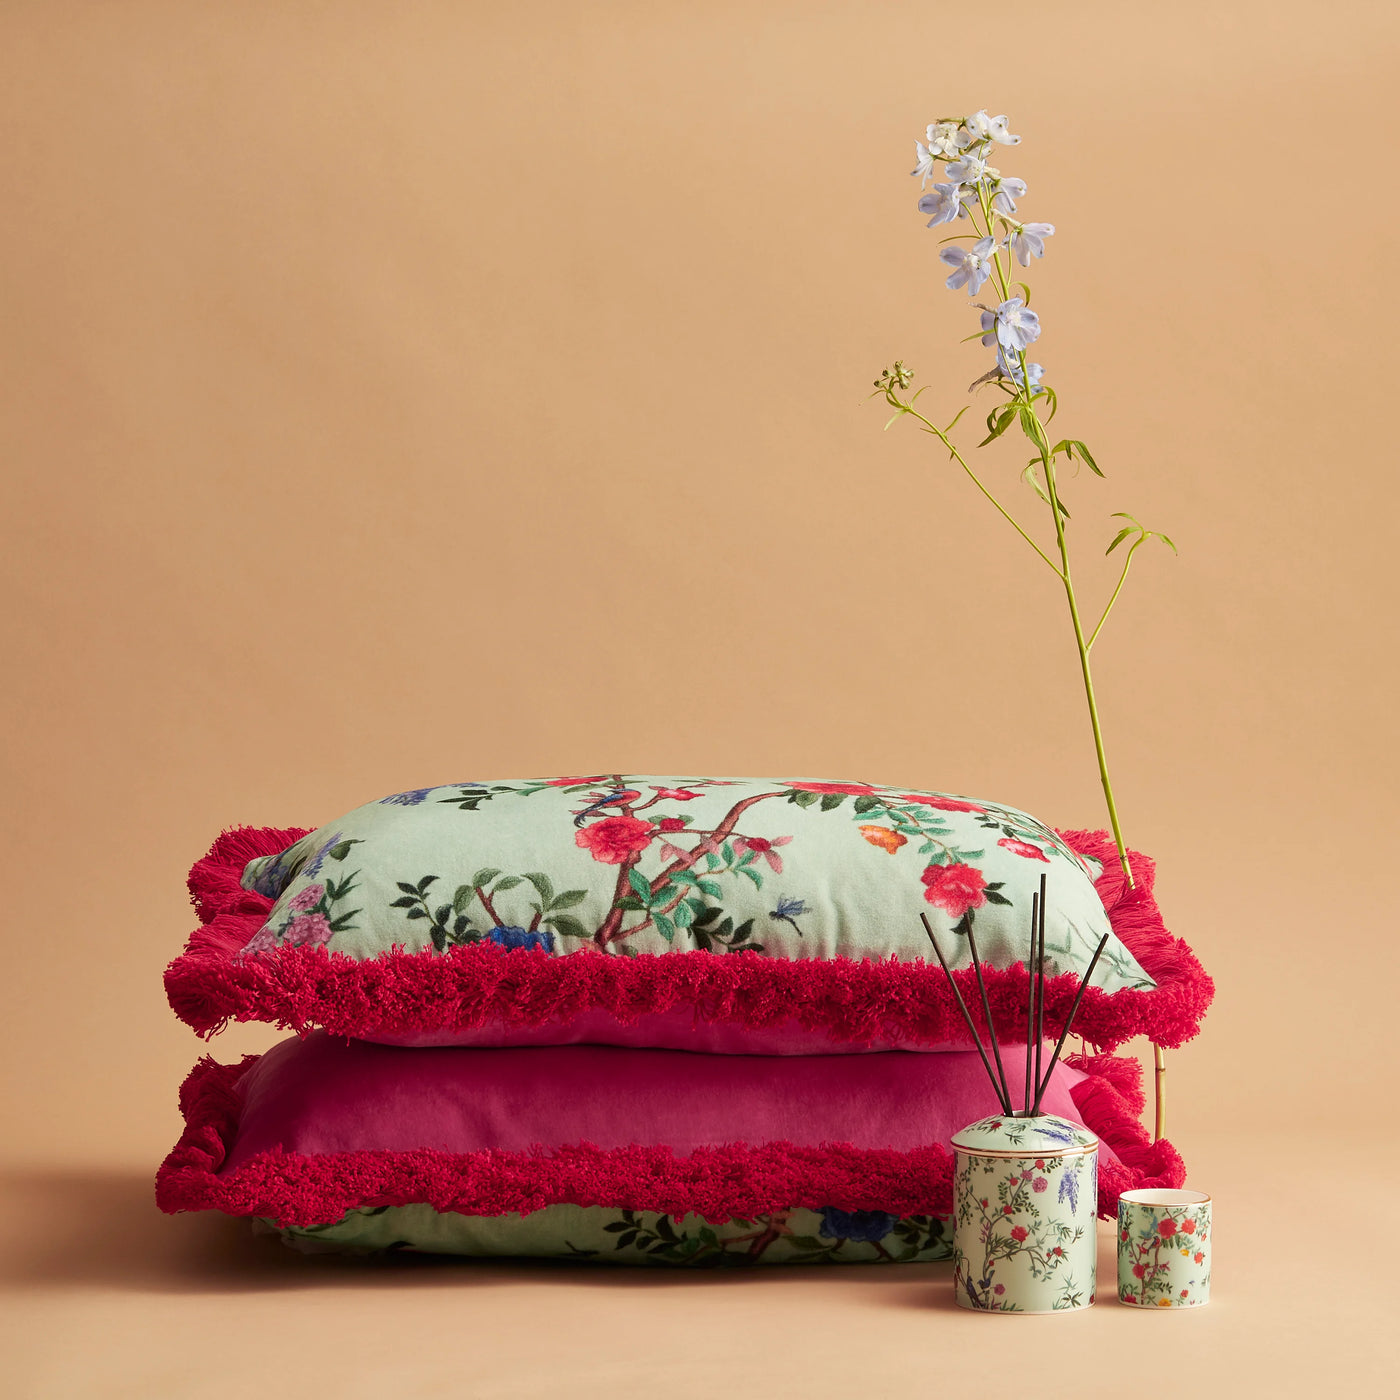 Maison Splendid oblong printed cushions and matching print travel candle and diffuser